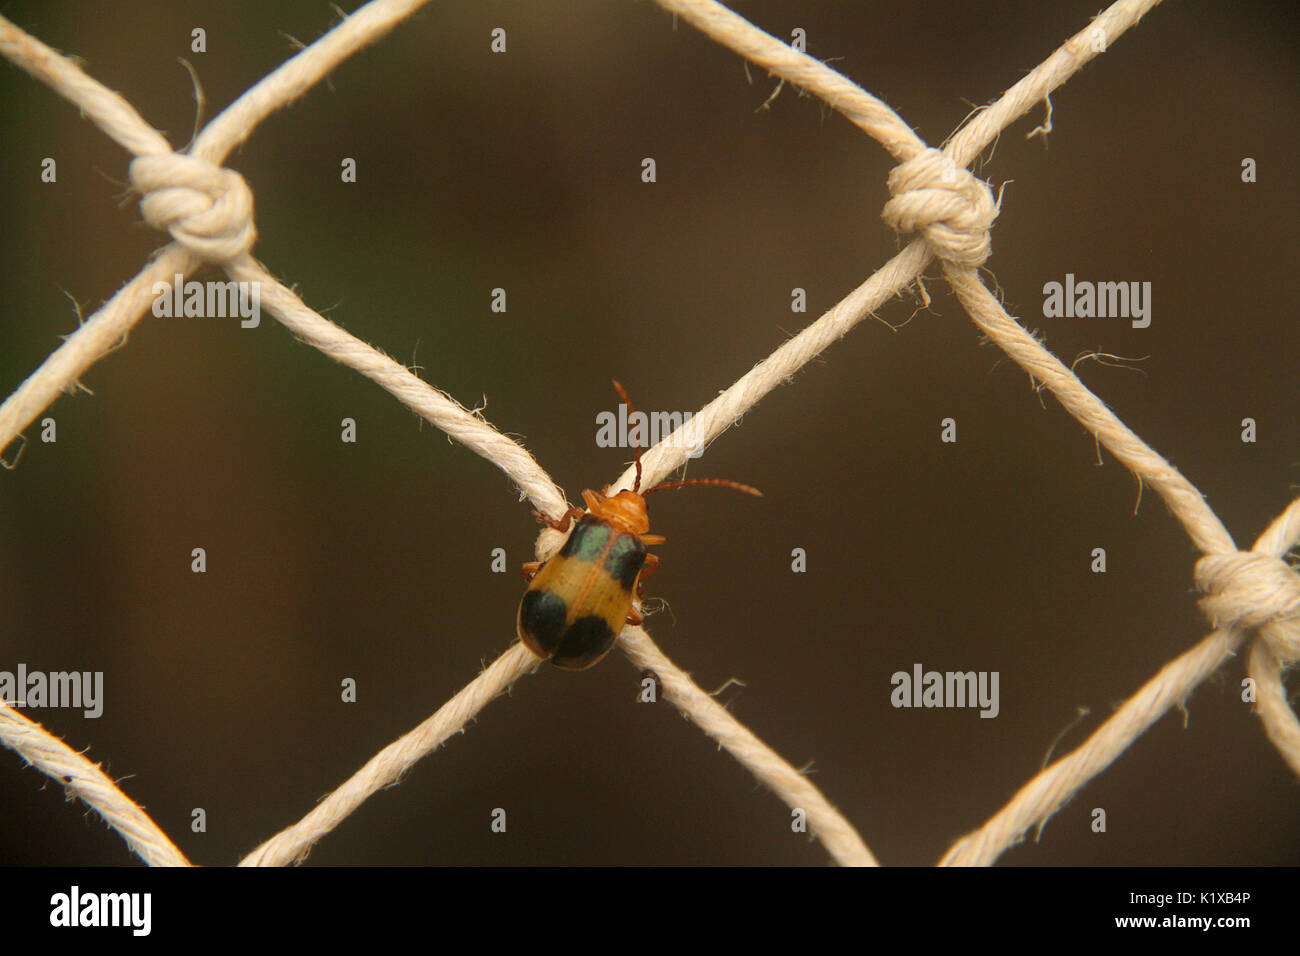 Small brown beetle on fence Stock Photo